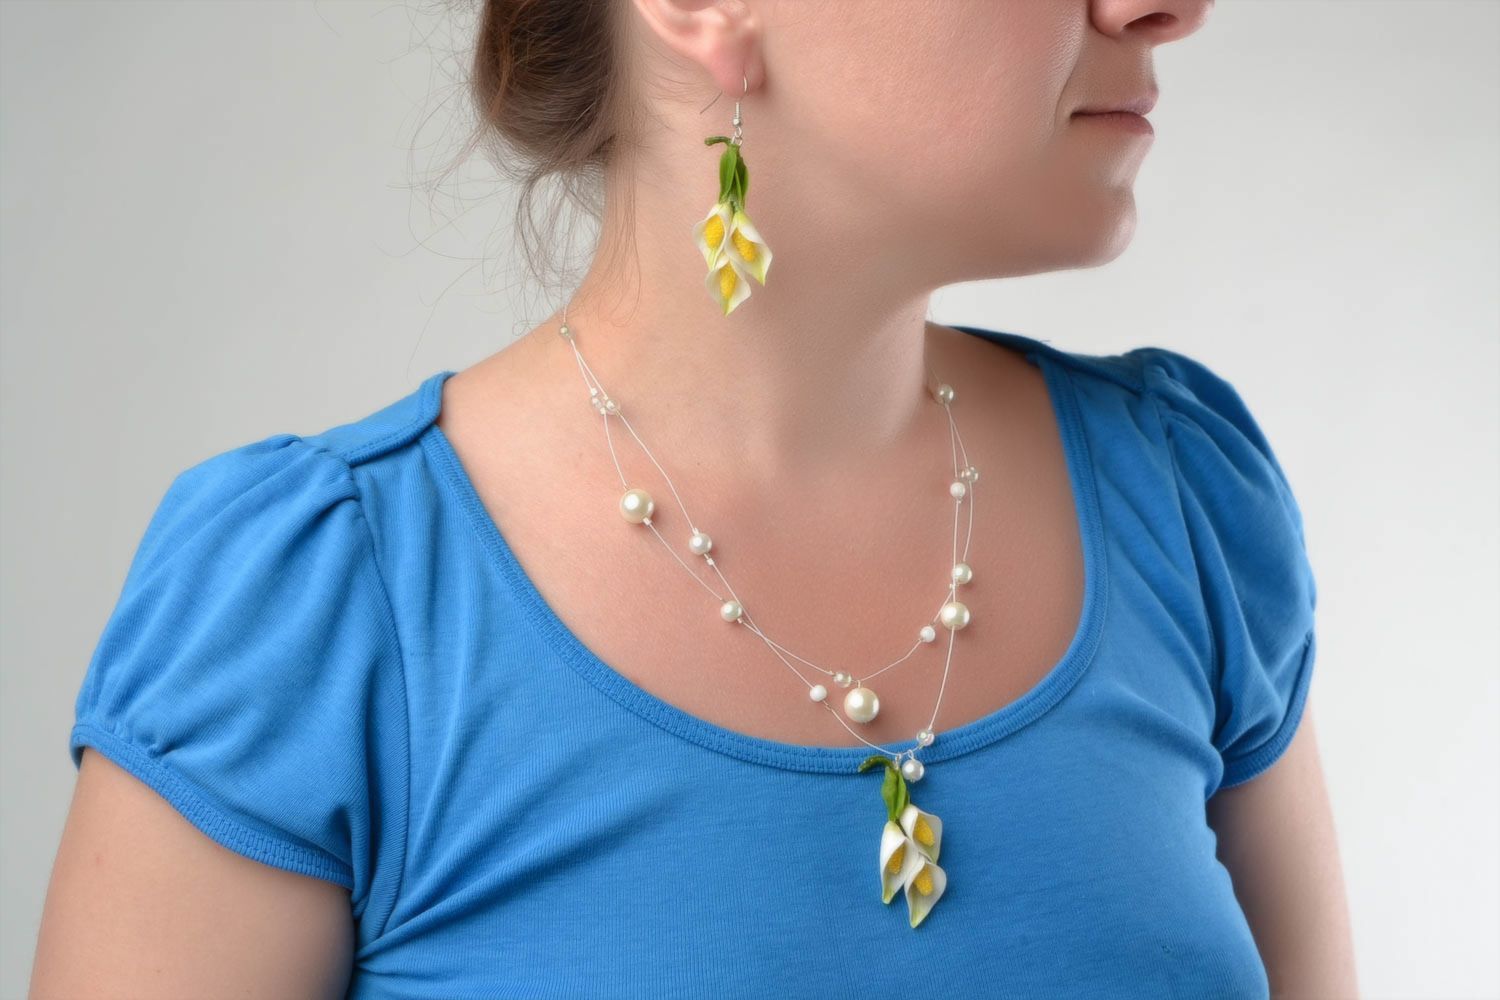 Set of handmade cold porcelain jewelry with flowers earrings and necklace photo 1